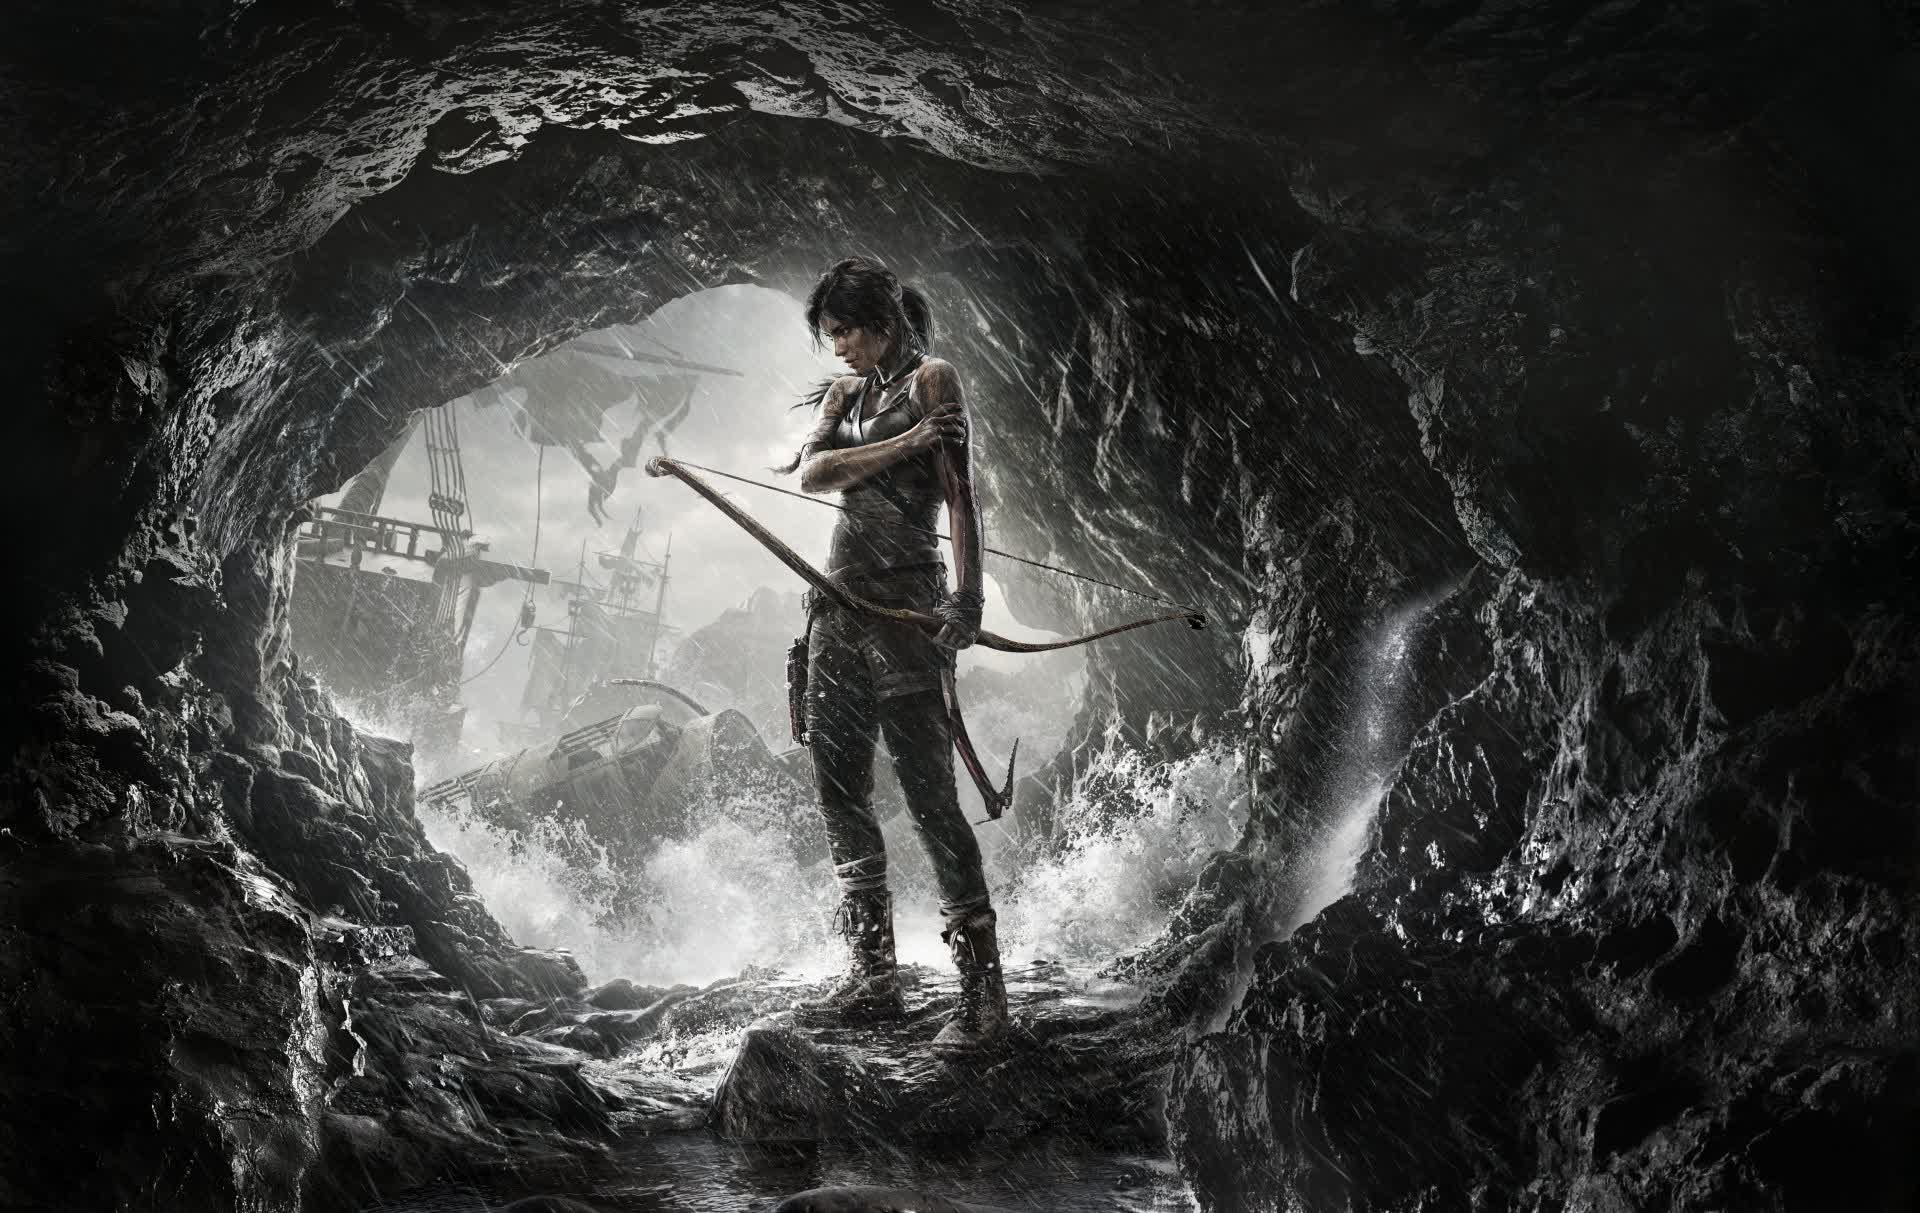 Amazon teams with Crystal Dynamics to publish the next Tomb Raider game